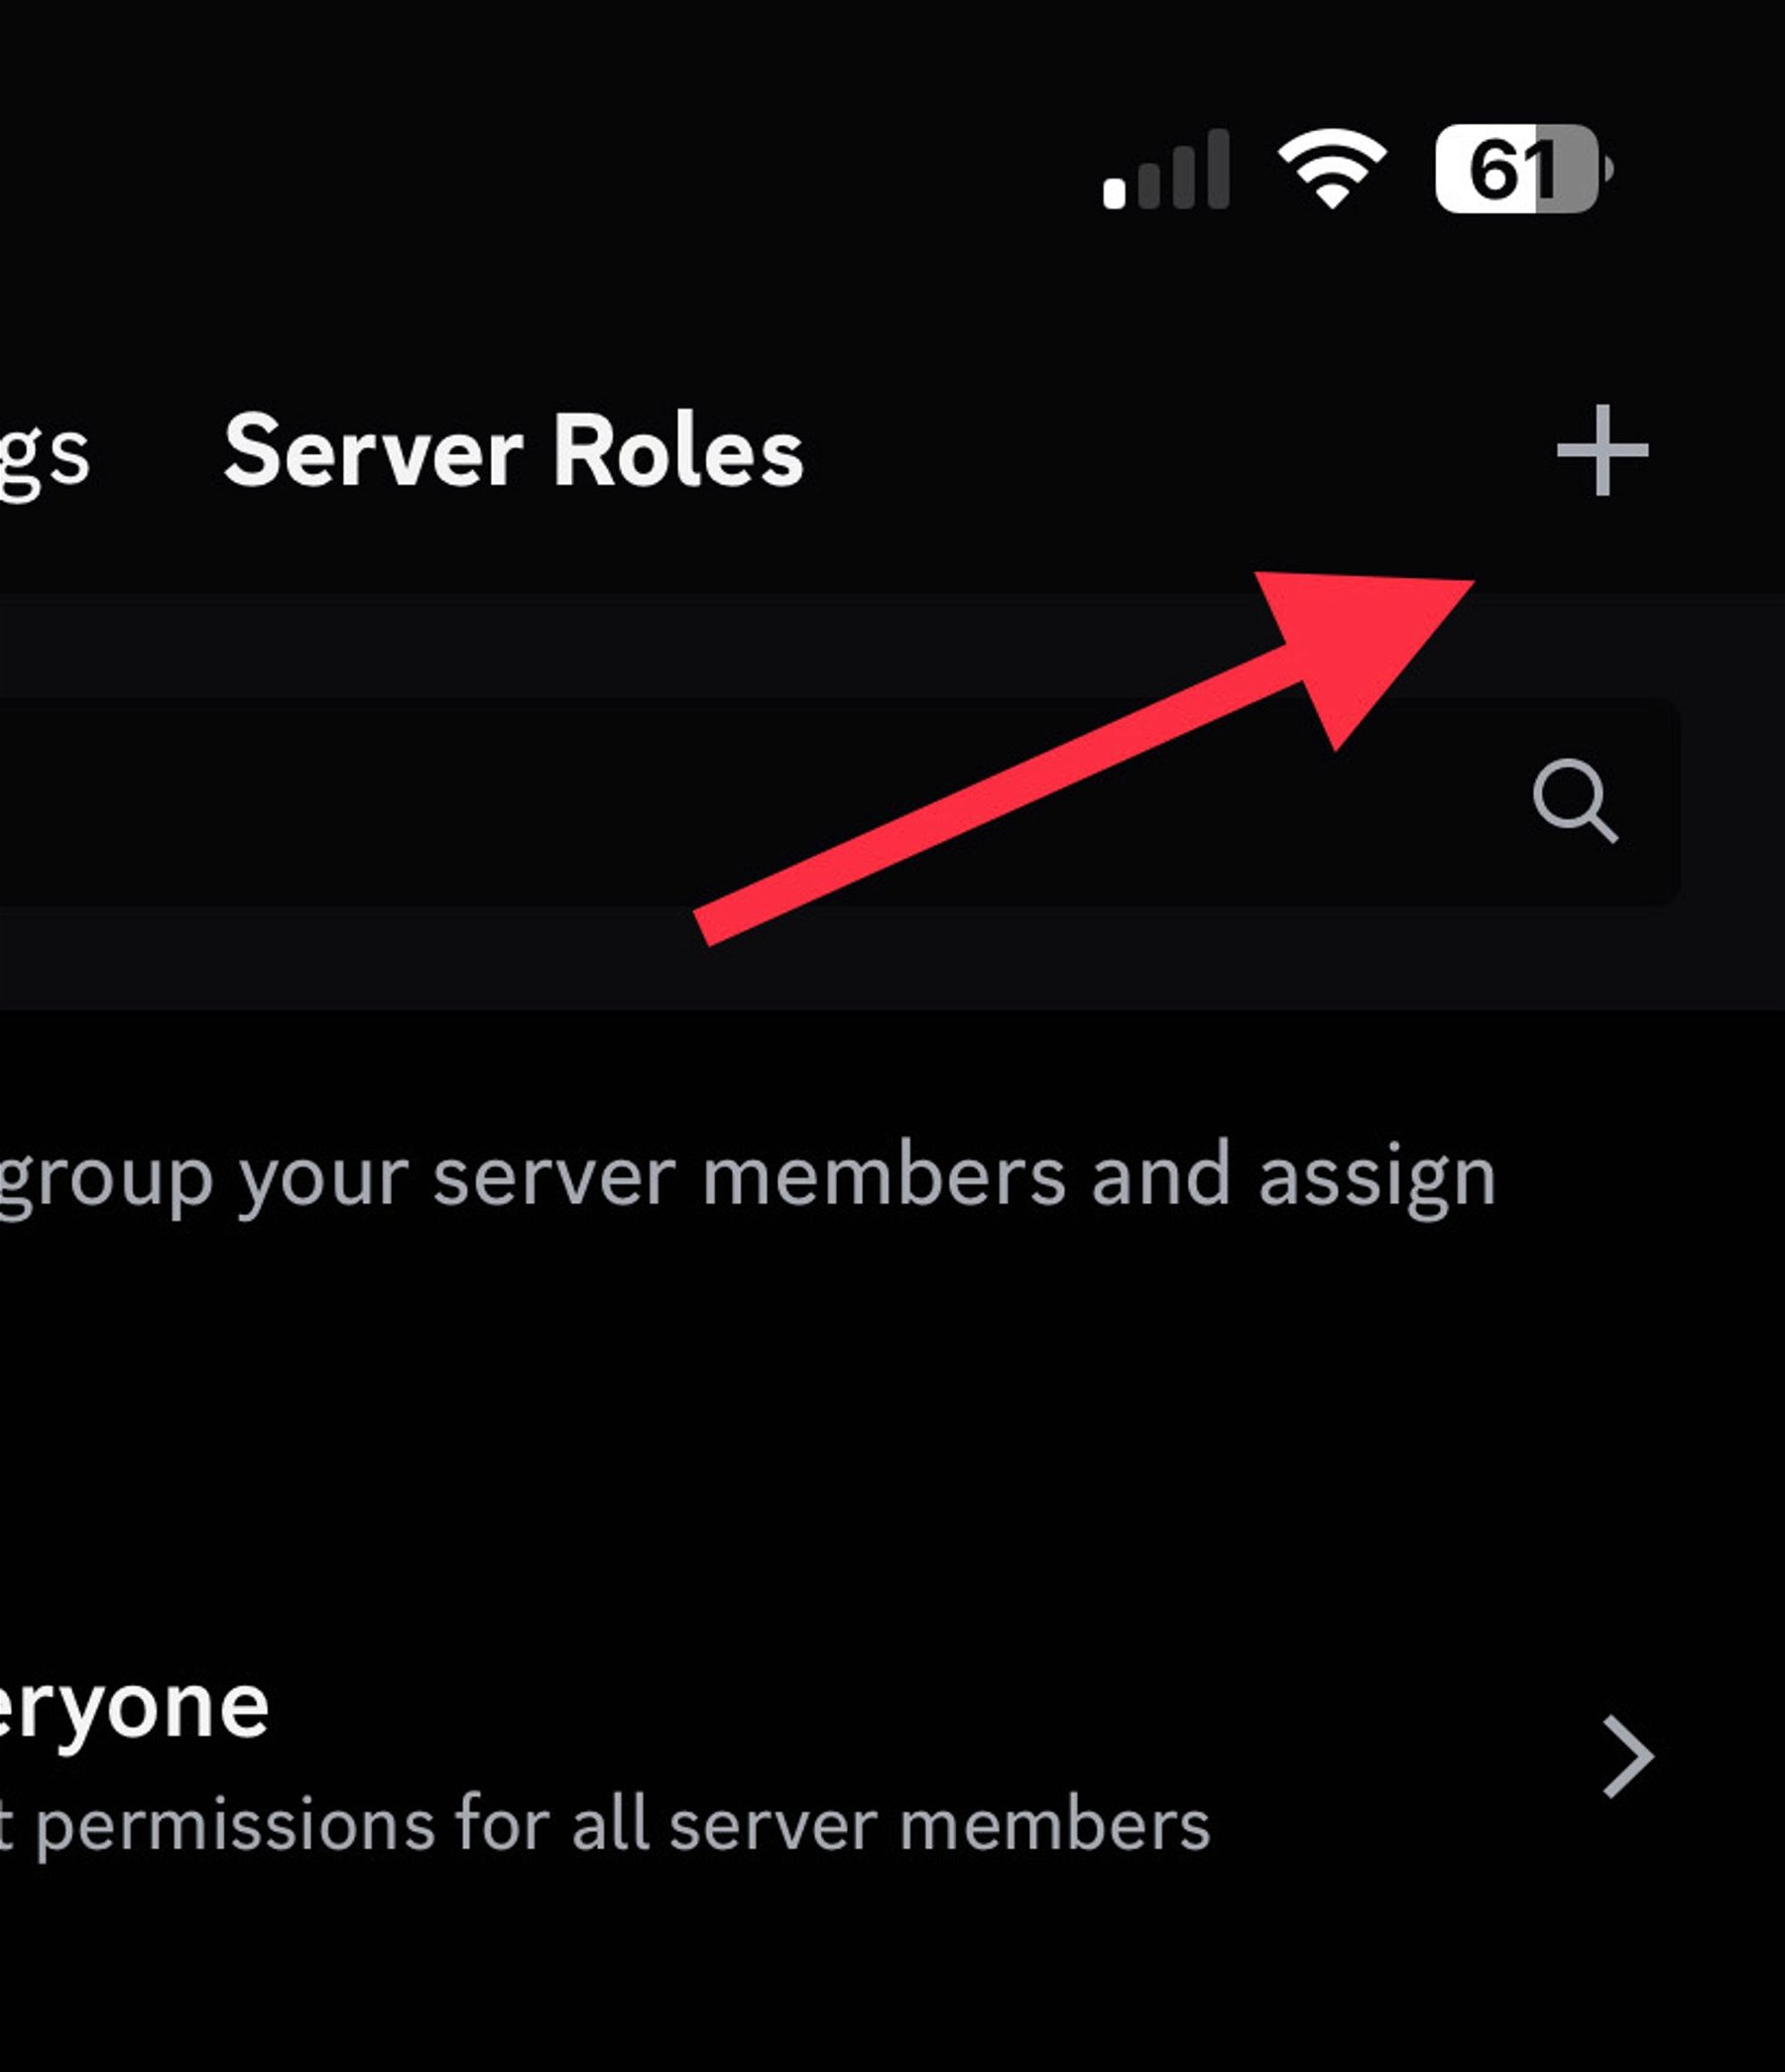 How to create roles and set permissions on your Discord server